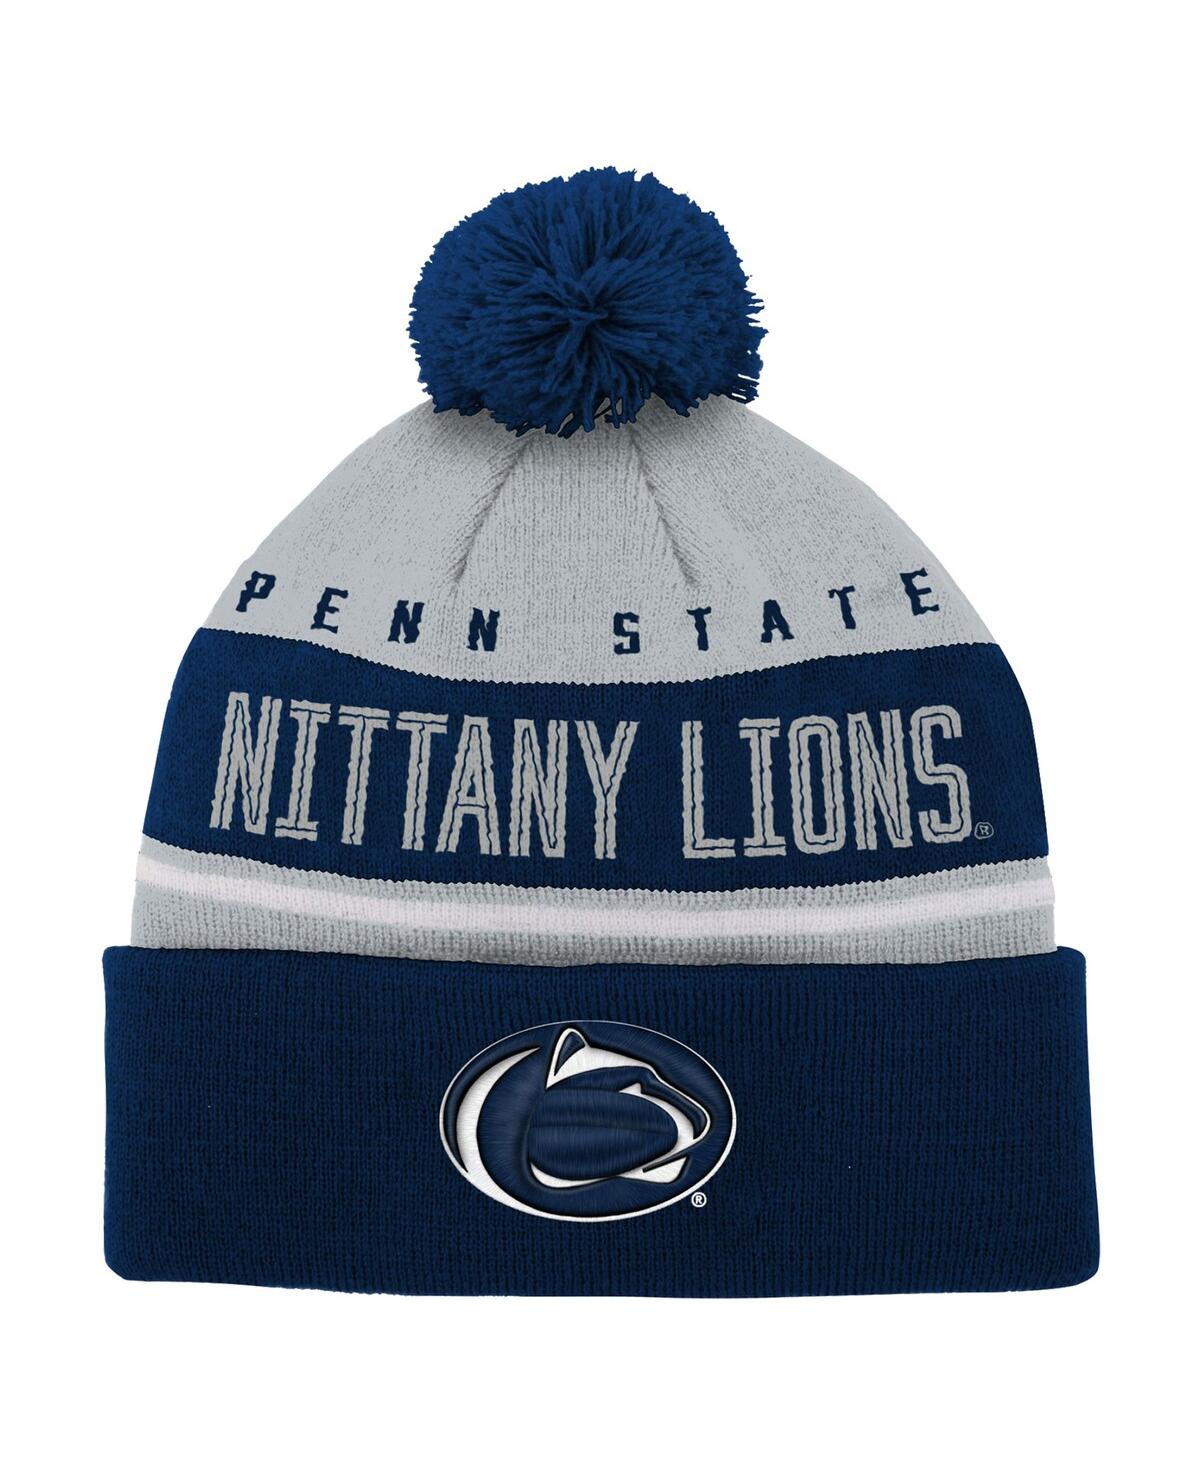 Outerstuff Kids' Youth Boys Navy Penn State Nittany Lions Redzone Jacquard Cuffed Knit Hat With Pom In Blue